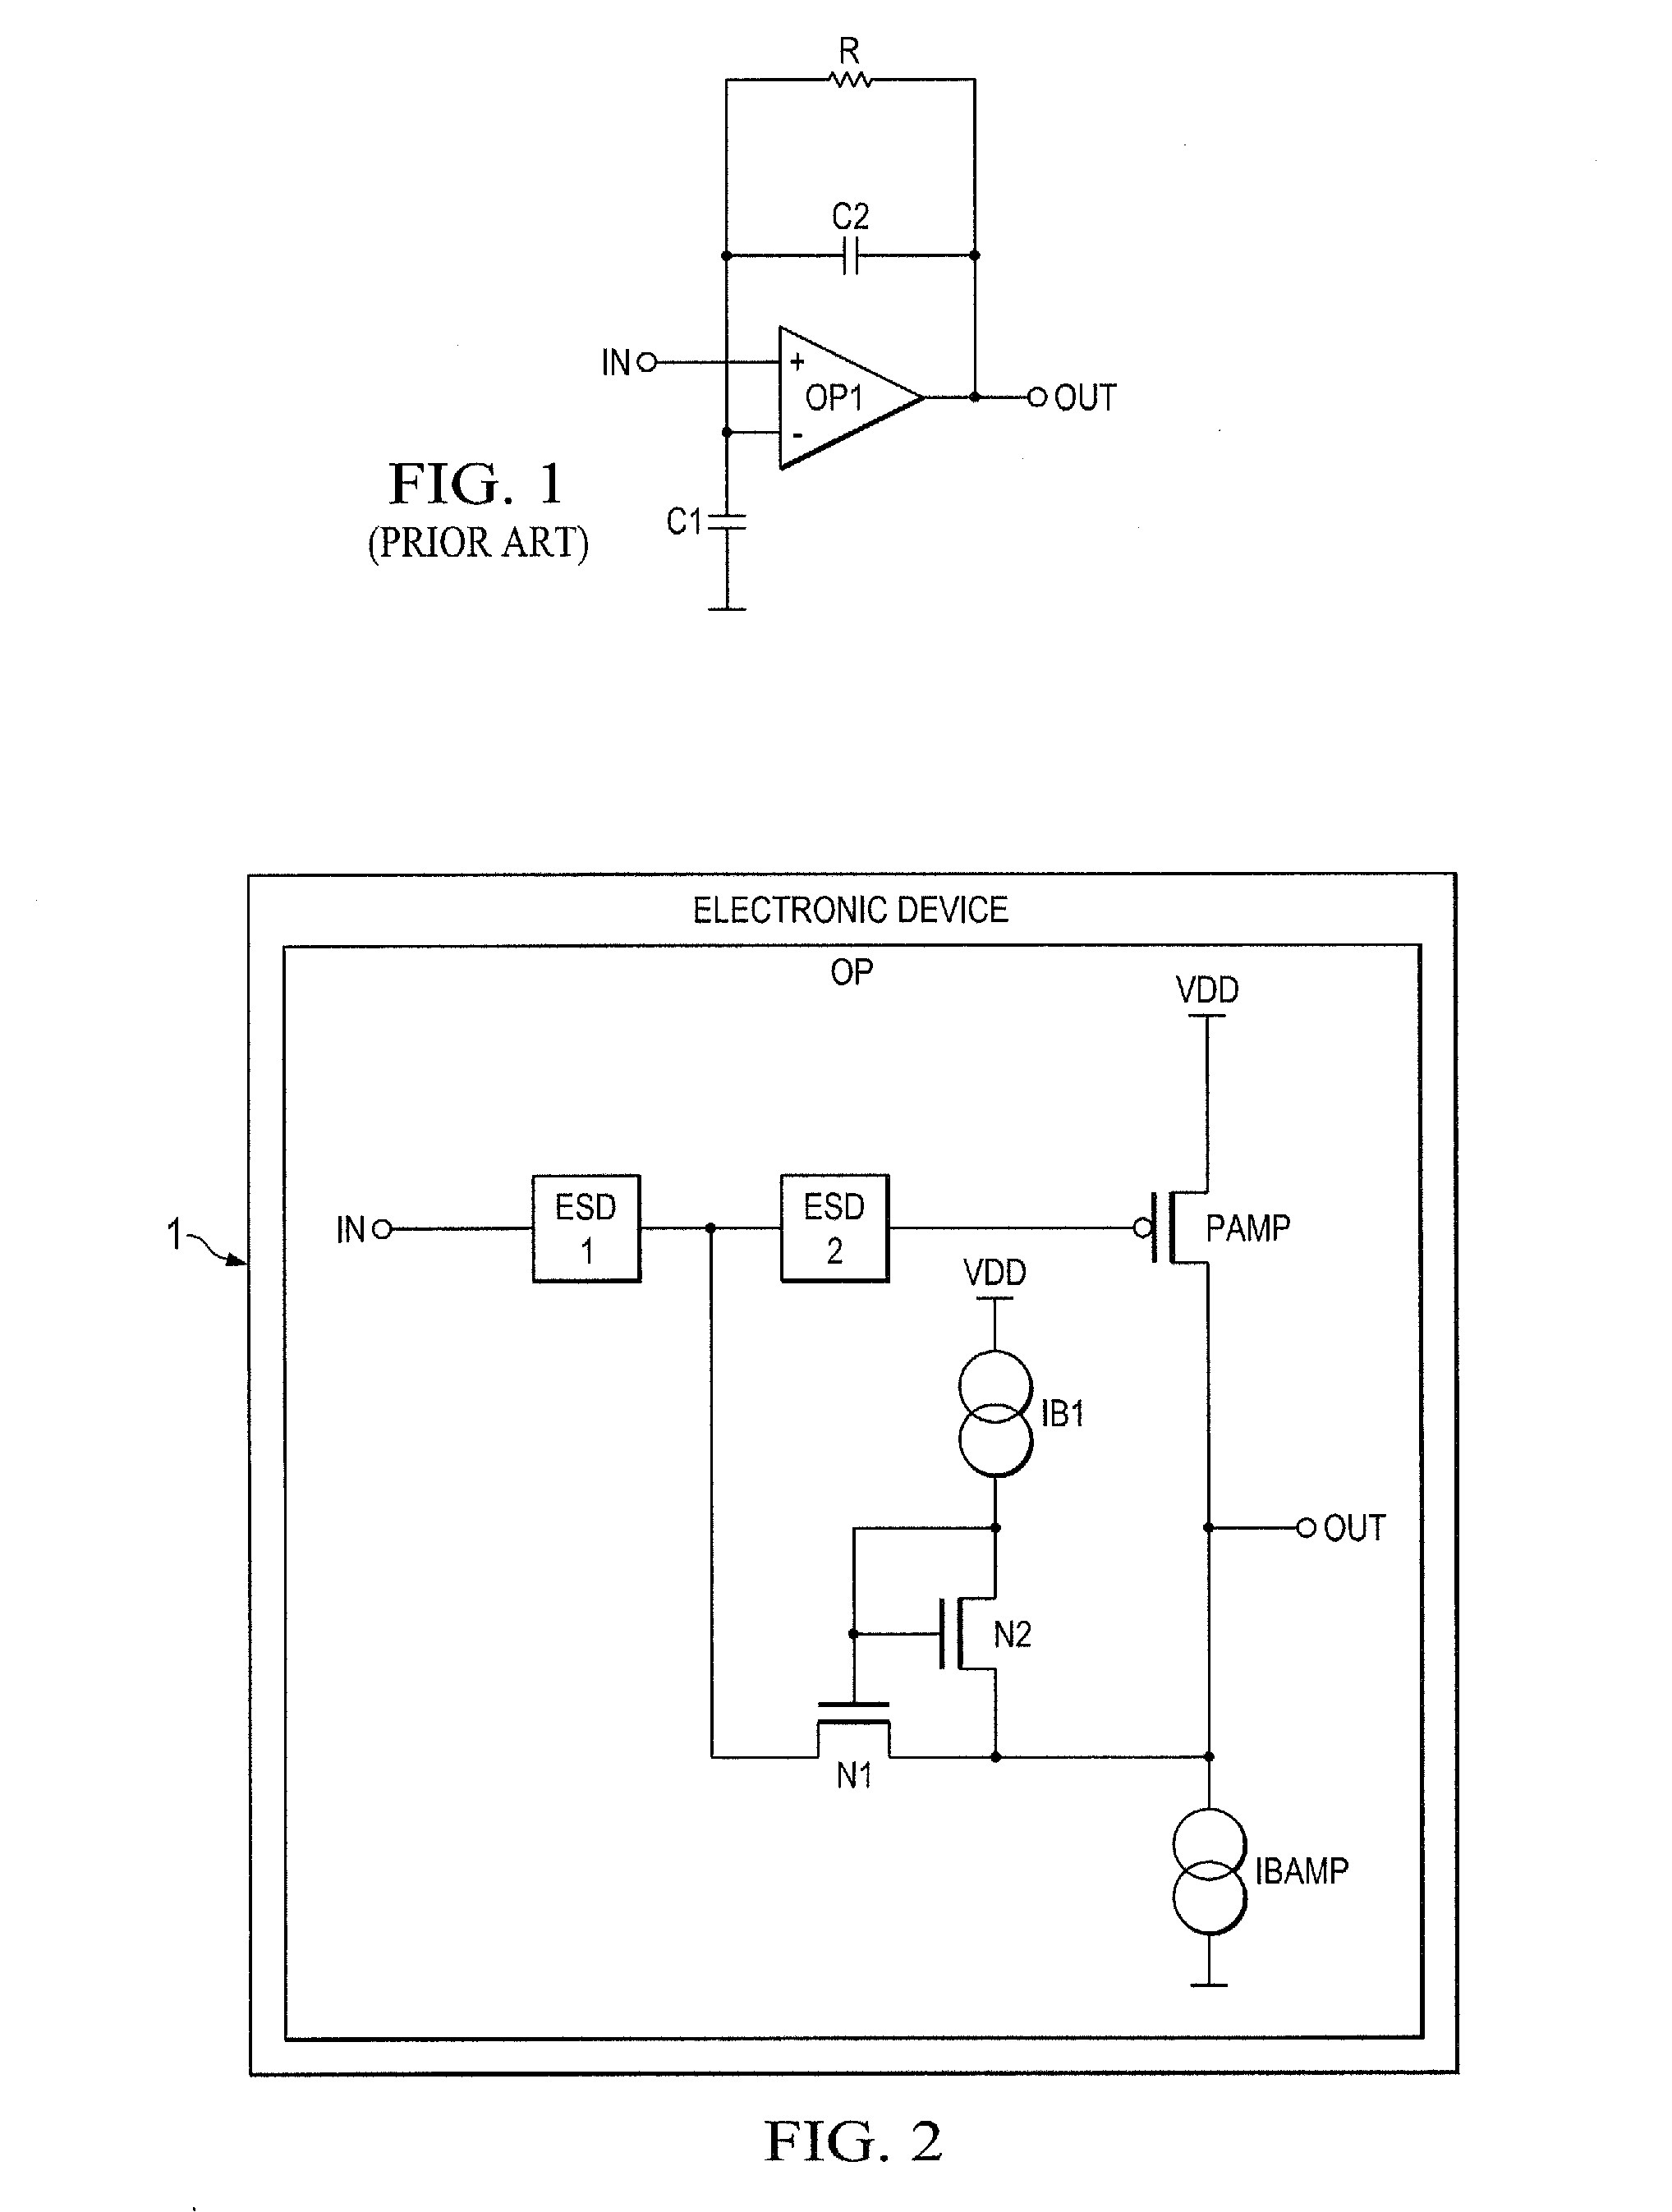 Electronic device and method for an amplifier with resistive feedback